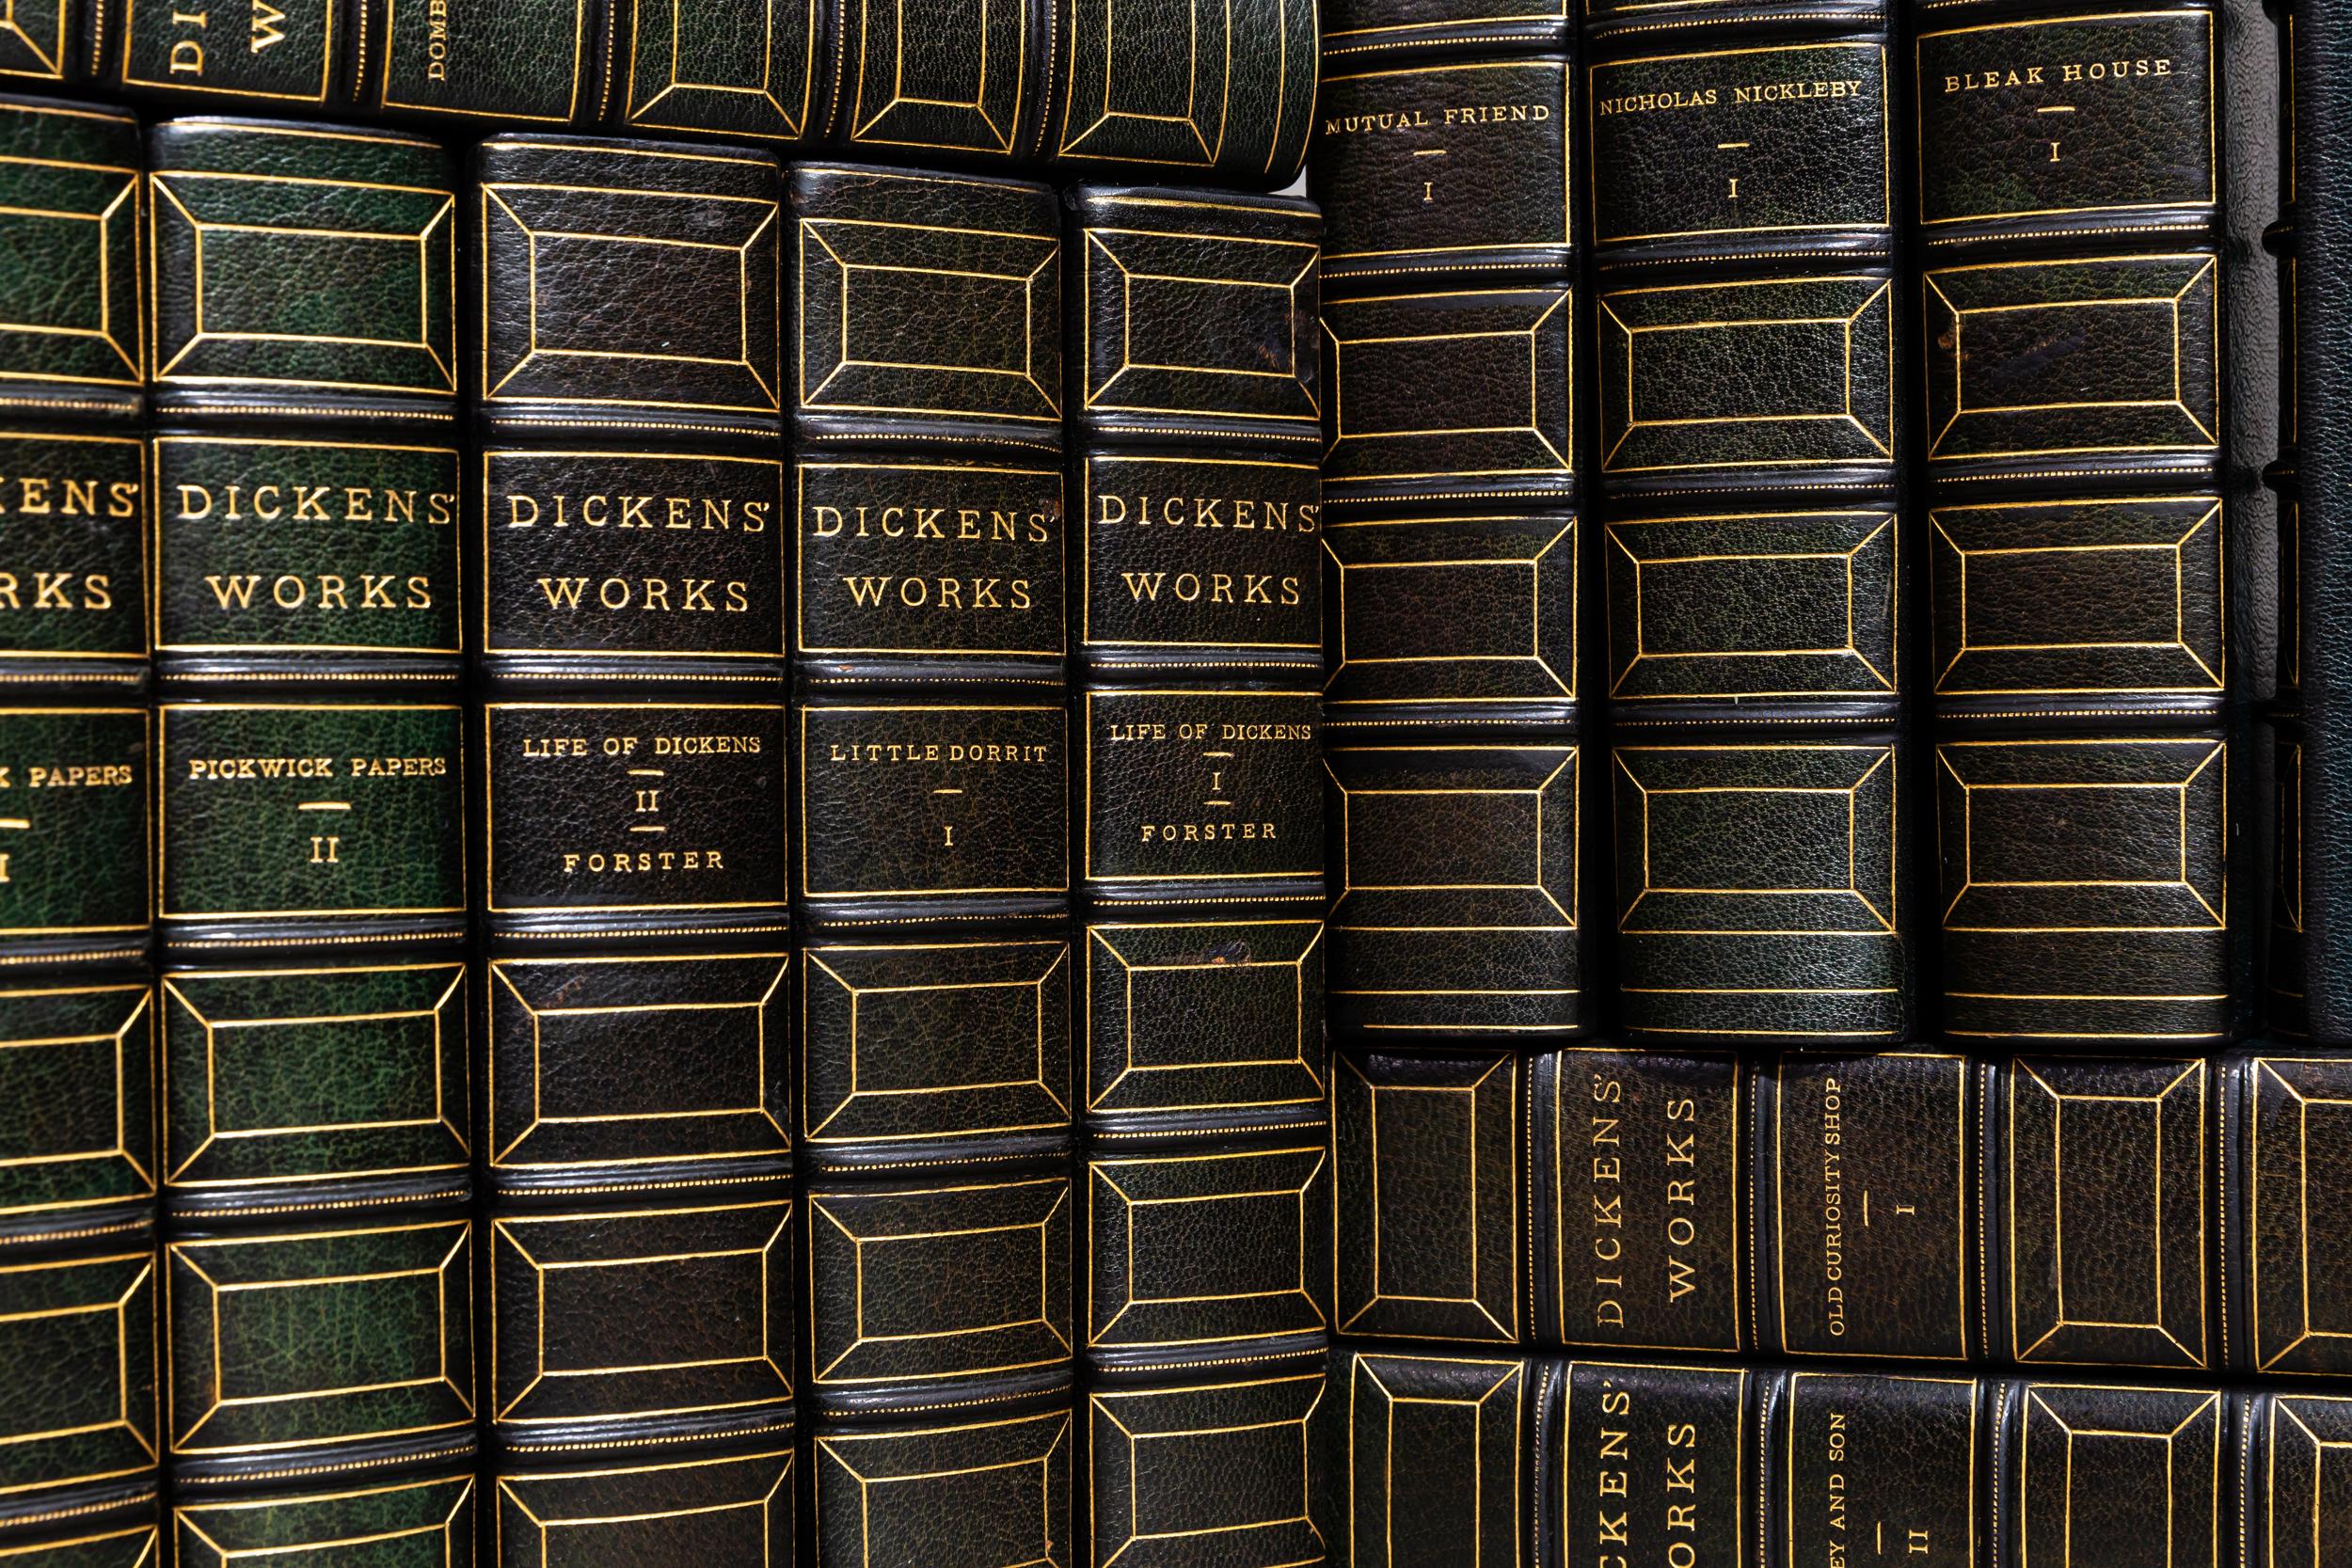 32 Volumes. Charles Dickens. The Complete Works. With more than 1,000 illustrations including all the usual and very many unusual plates, Edited by Richard Garnett, Edition deGrandeDeluxe, limited to 500 numbered copies, this is #212. Bound in 3/4